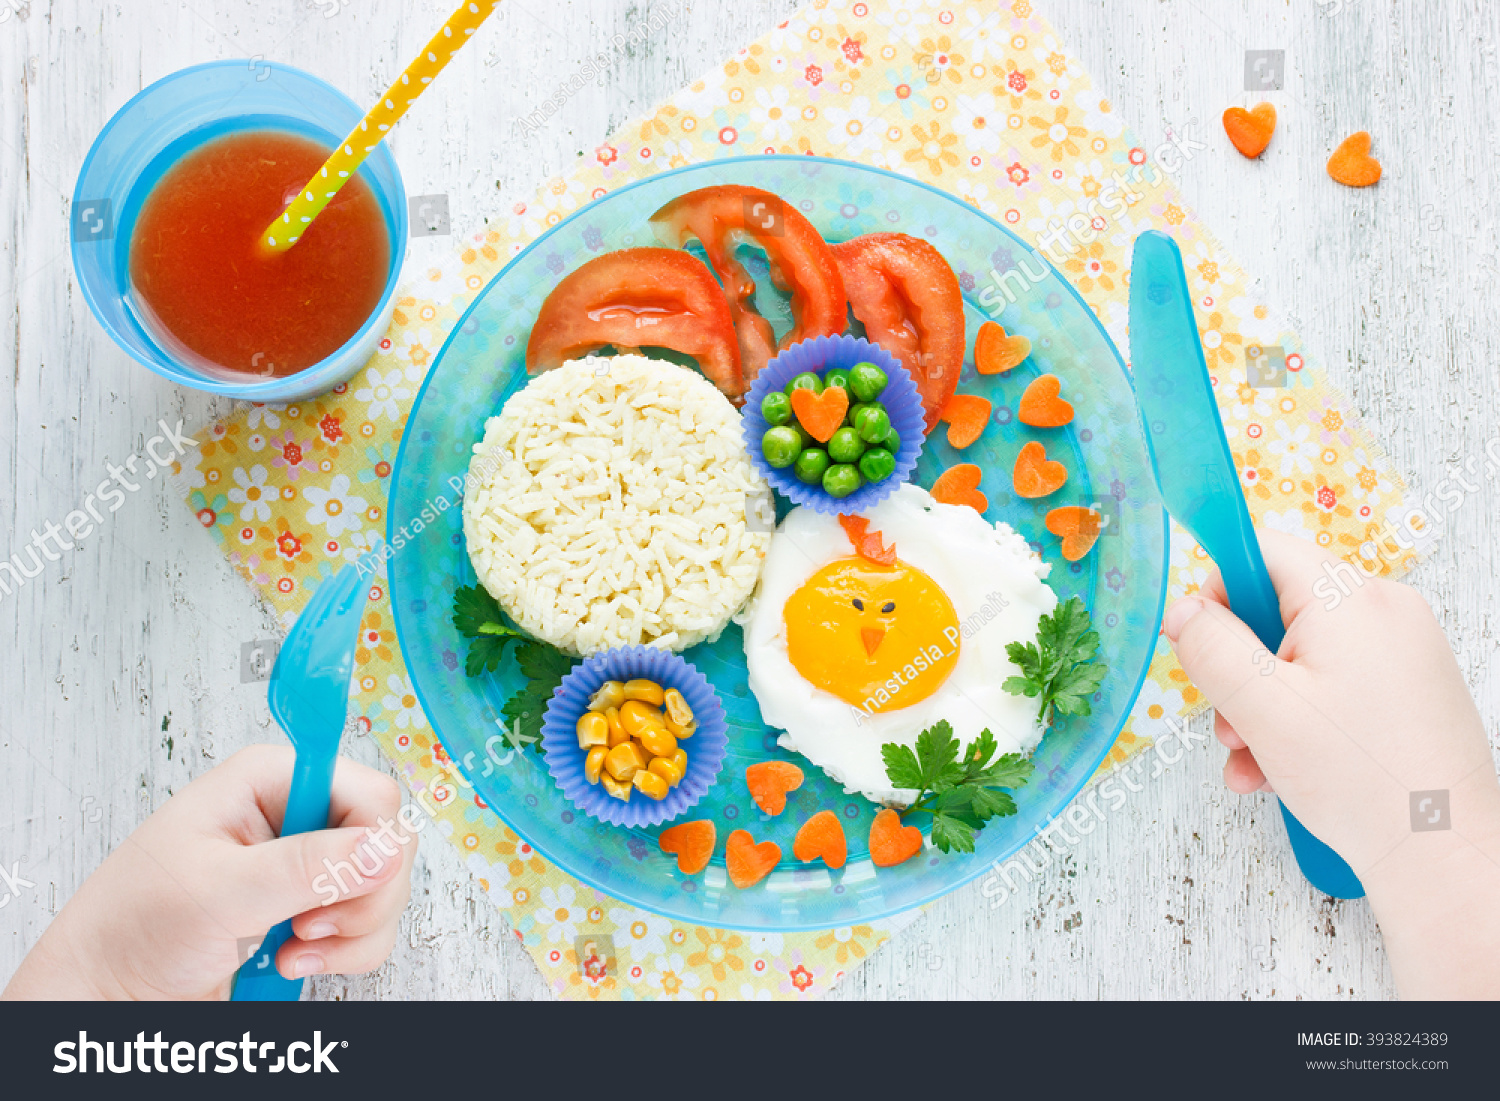 Concept Healthy Food Child Food Art Stock Photo Edit Now 393824389